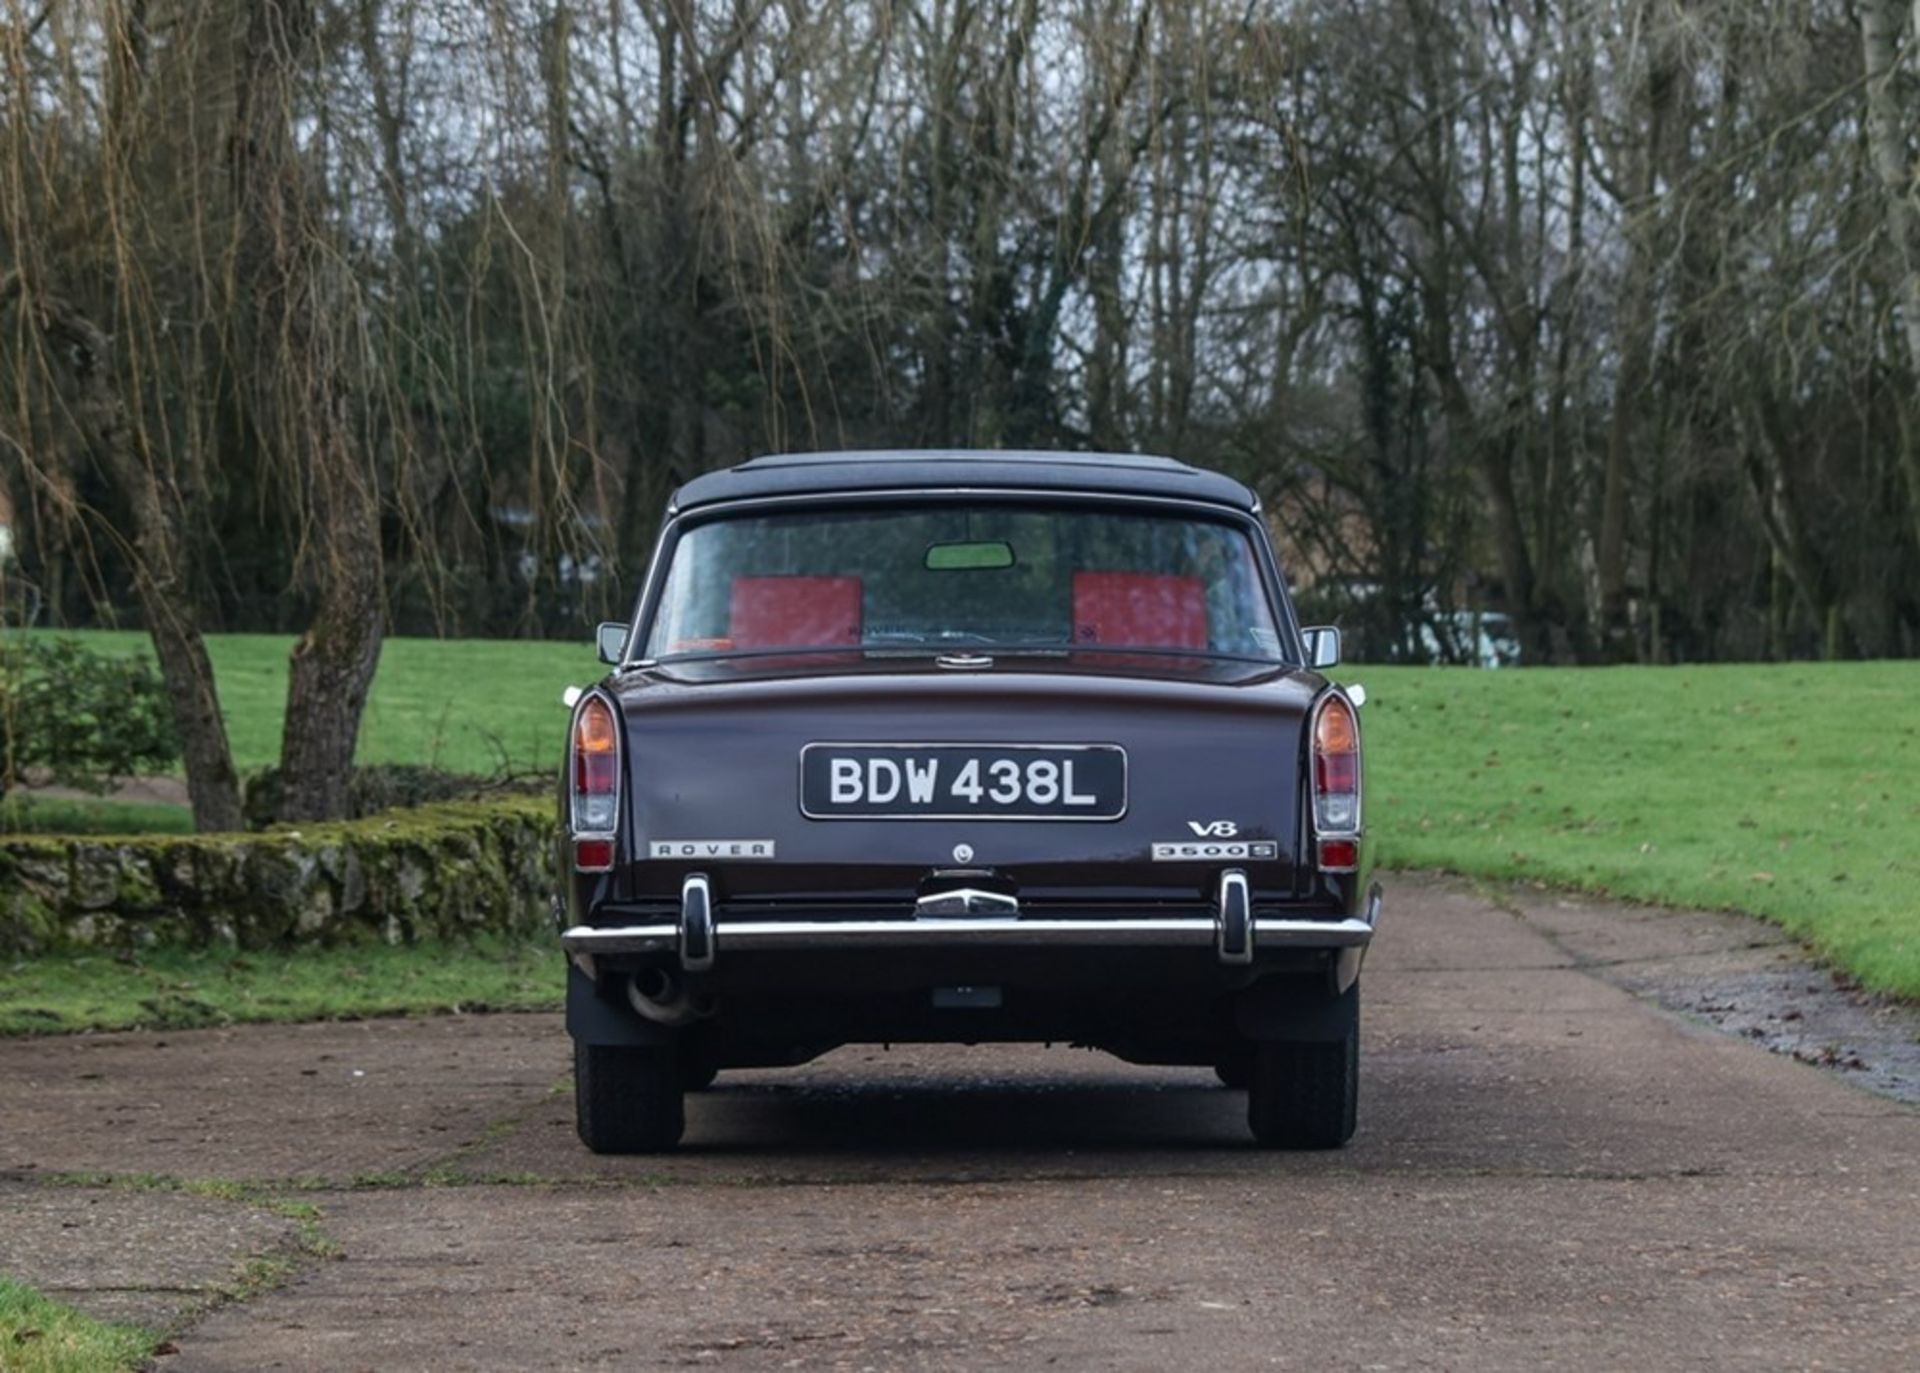 1972 Rover P6 3500 S - Image 4 of 9